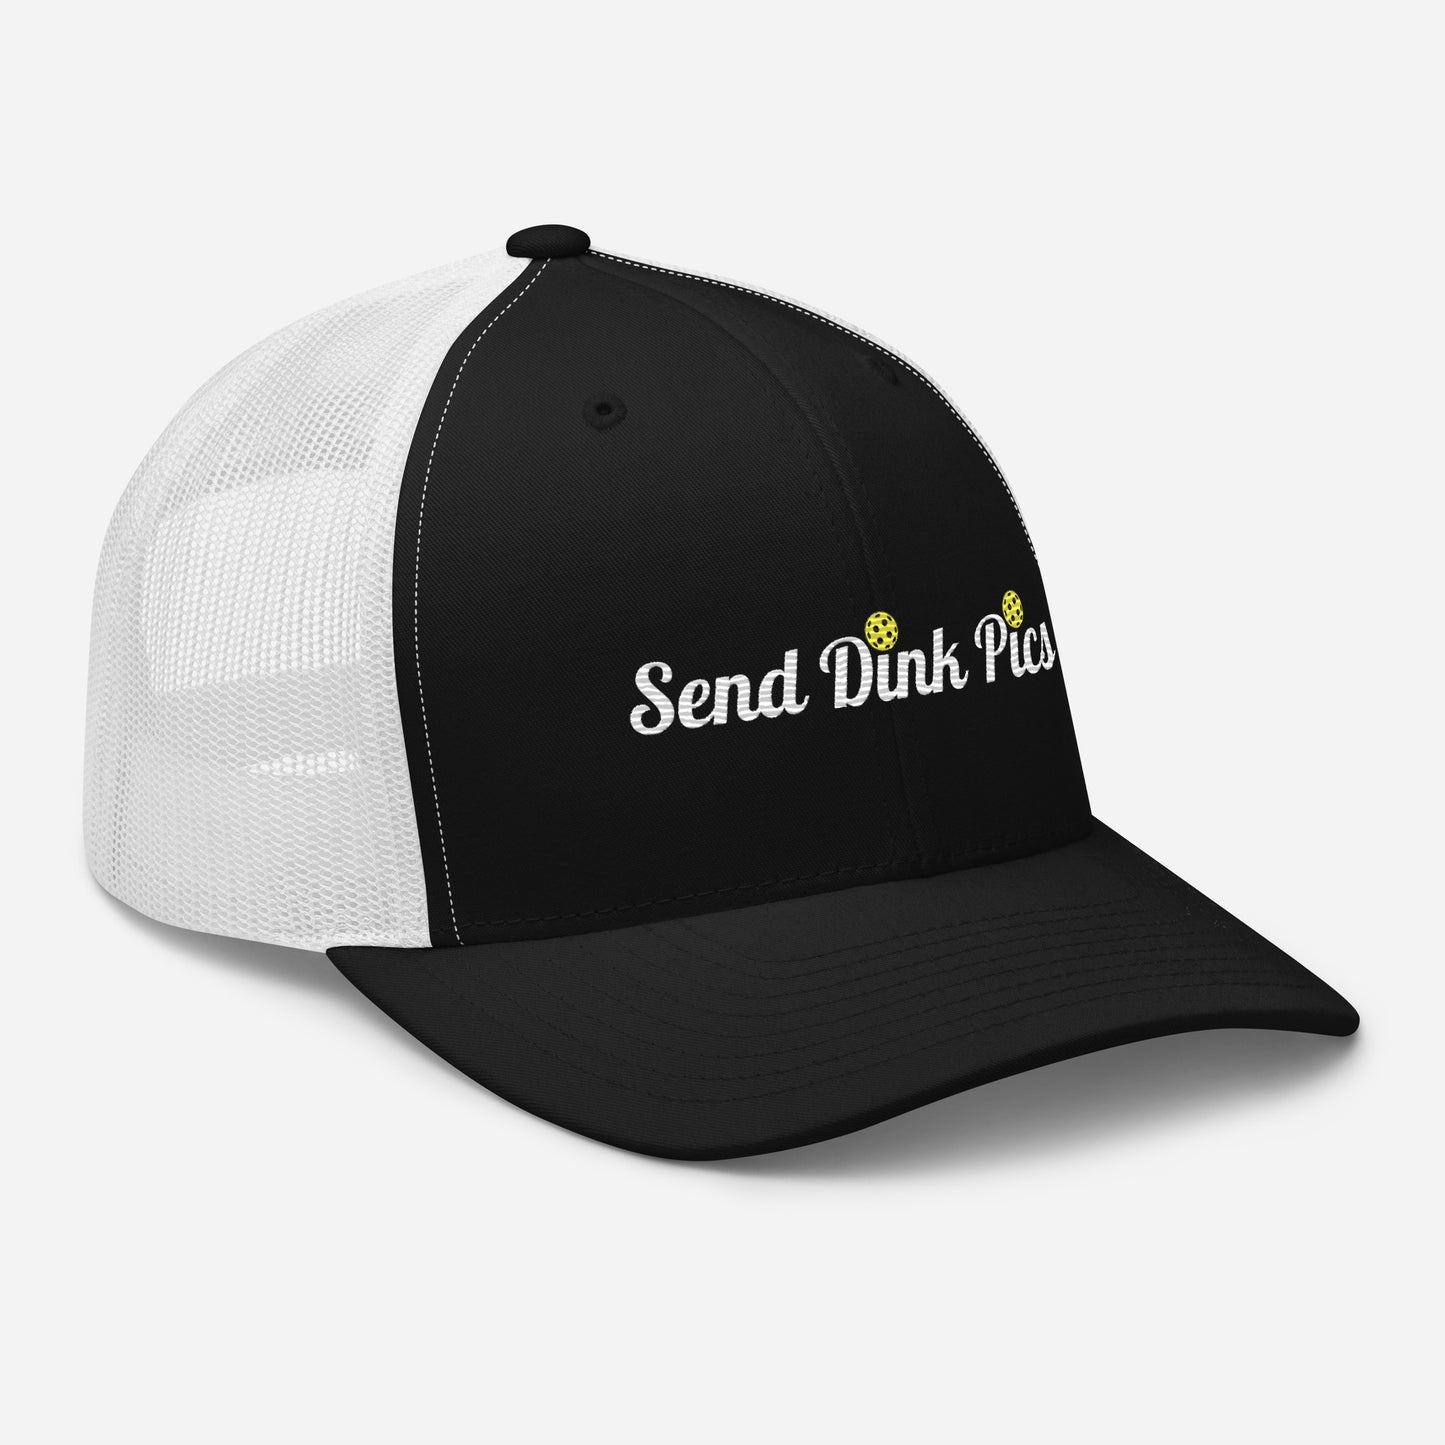 Send Dink Pics Funny Embroidered (in cursive) Pickleball Trucker Hat